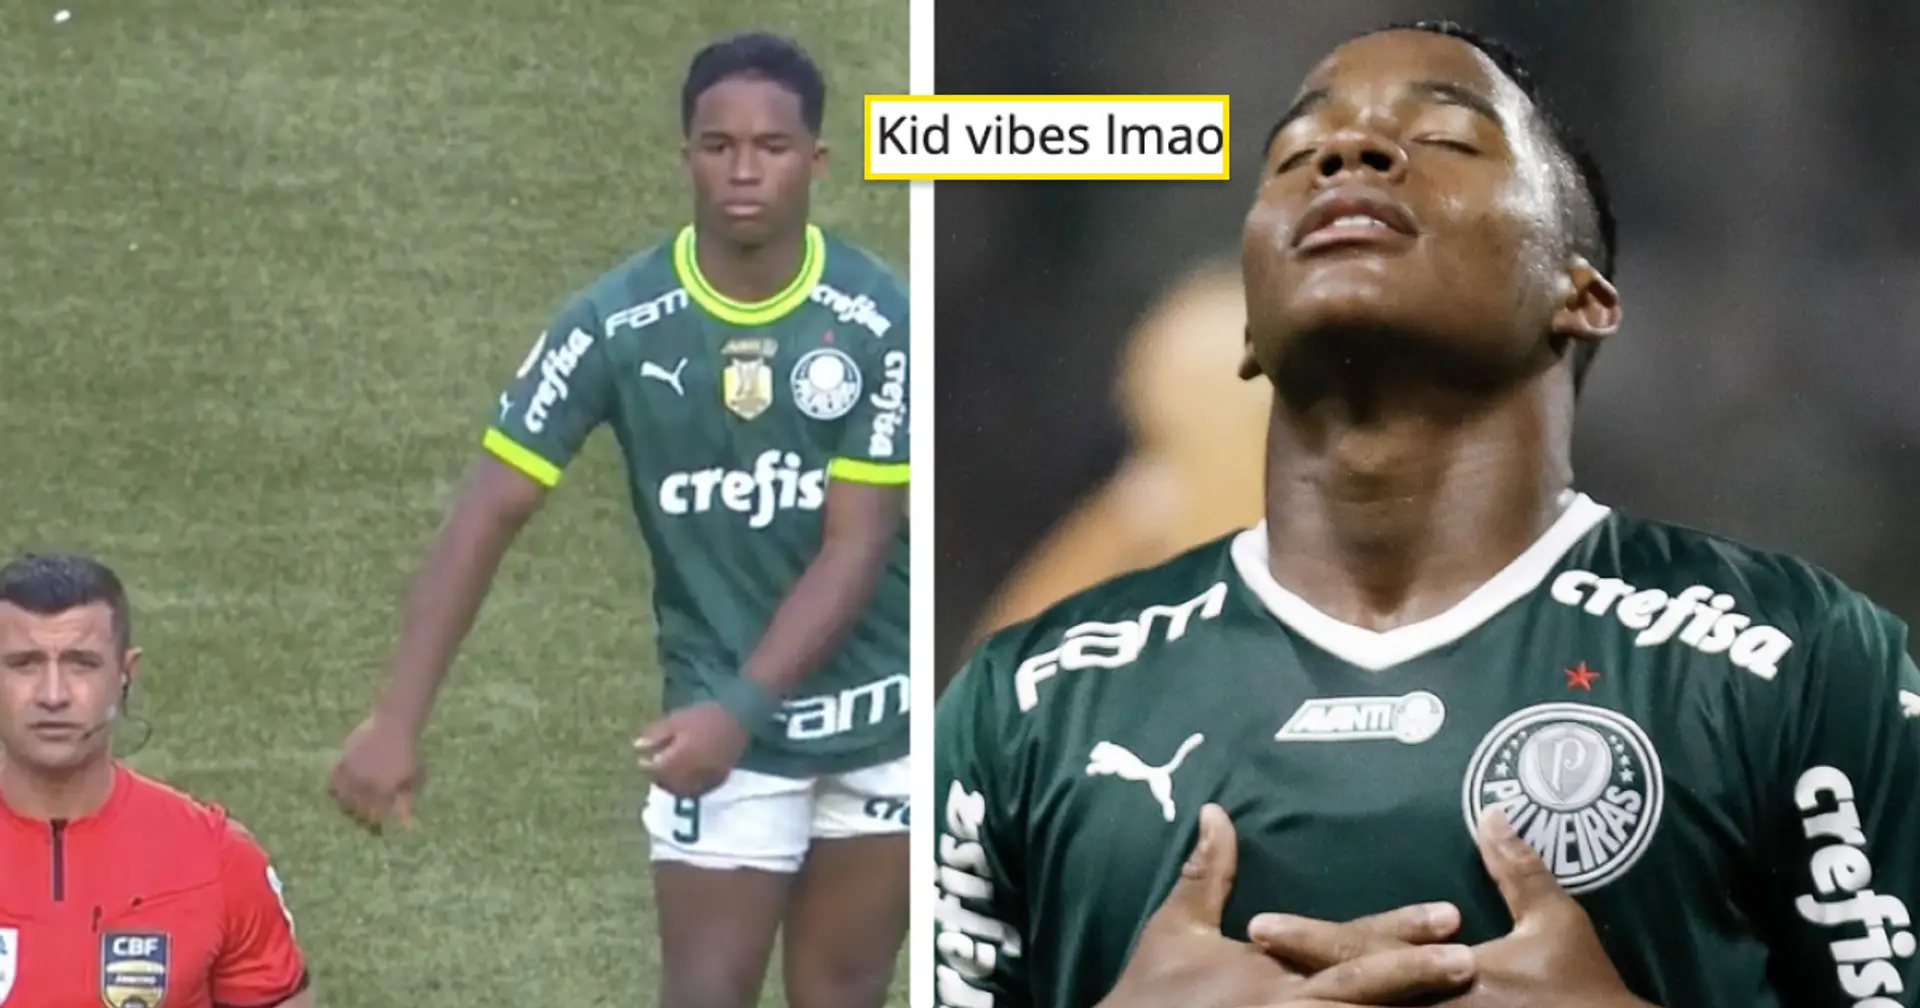 Endrick spotted dancing during Palmeiras game – there's one more weird thing he does in matches